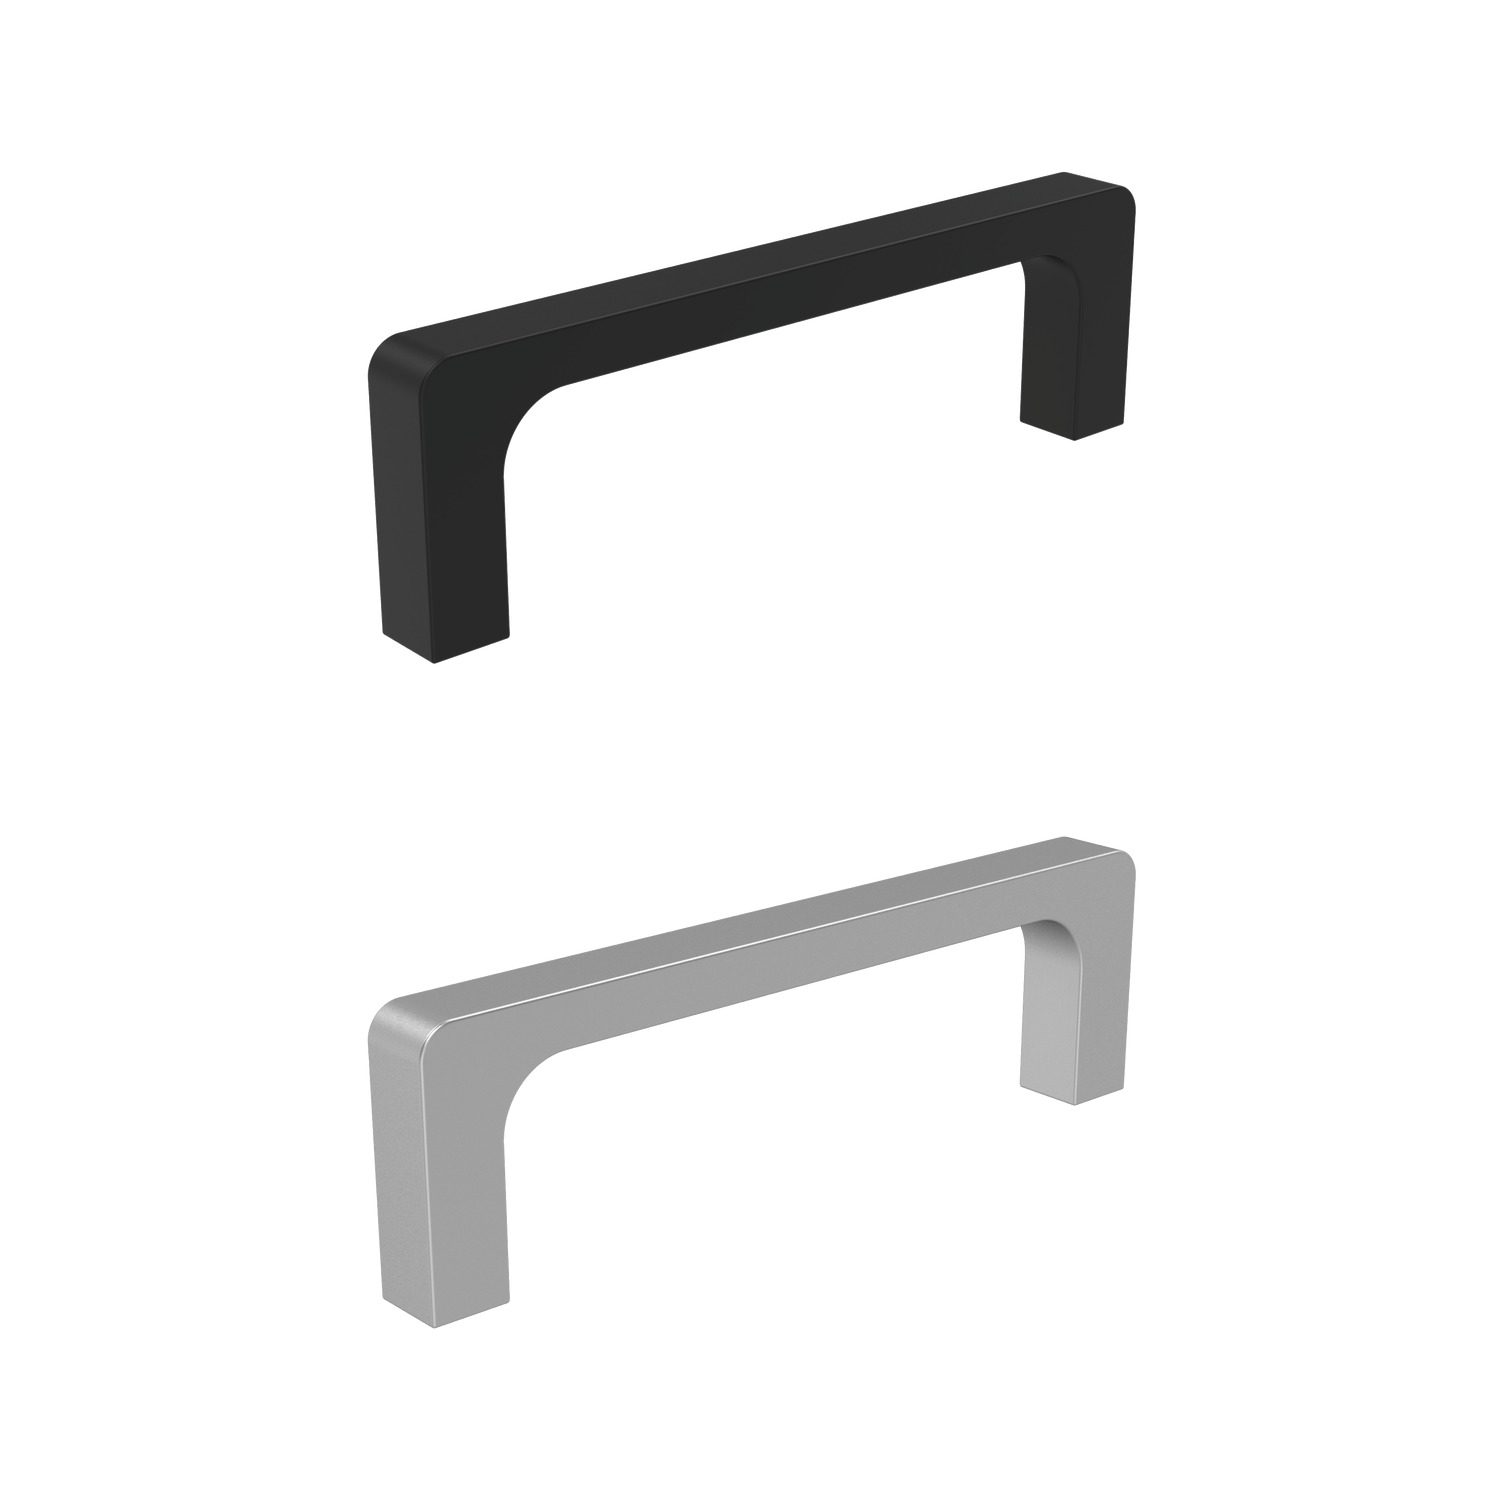 Pull Handles - Aluminium Aluminium pull handles has a minimum stress resistance of 500N. The handles are vibration ground and anodized to a matte finish in natural or black colour.